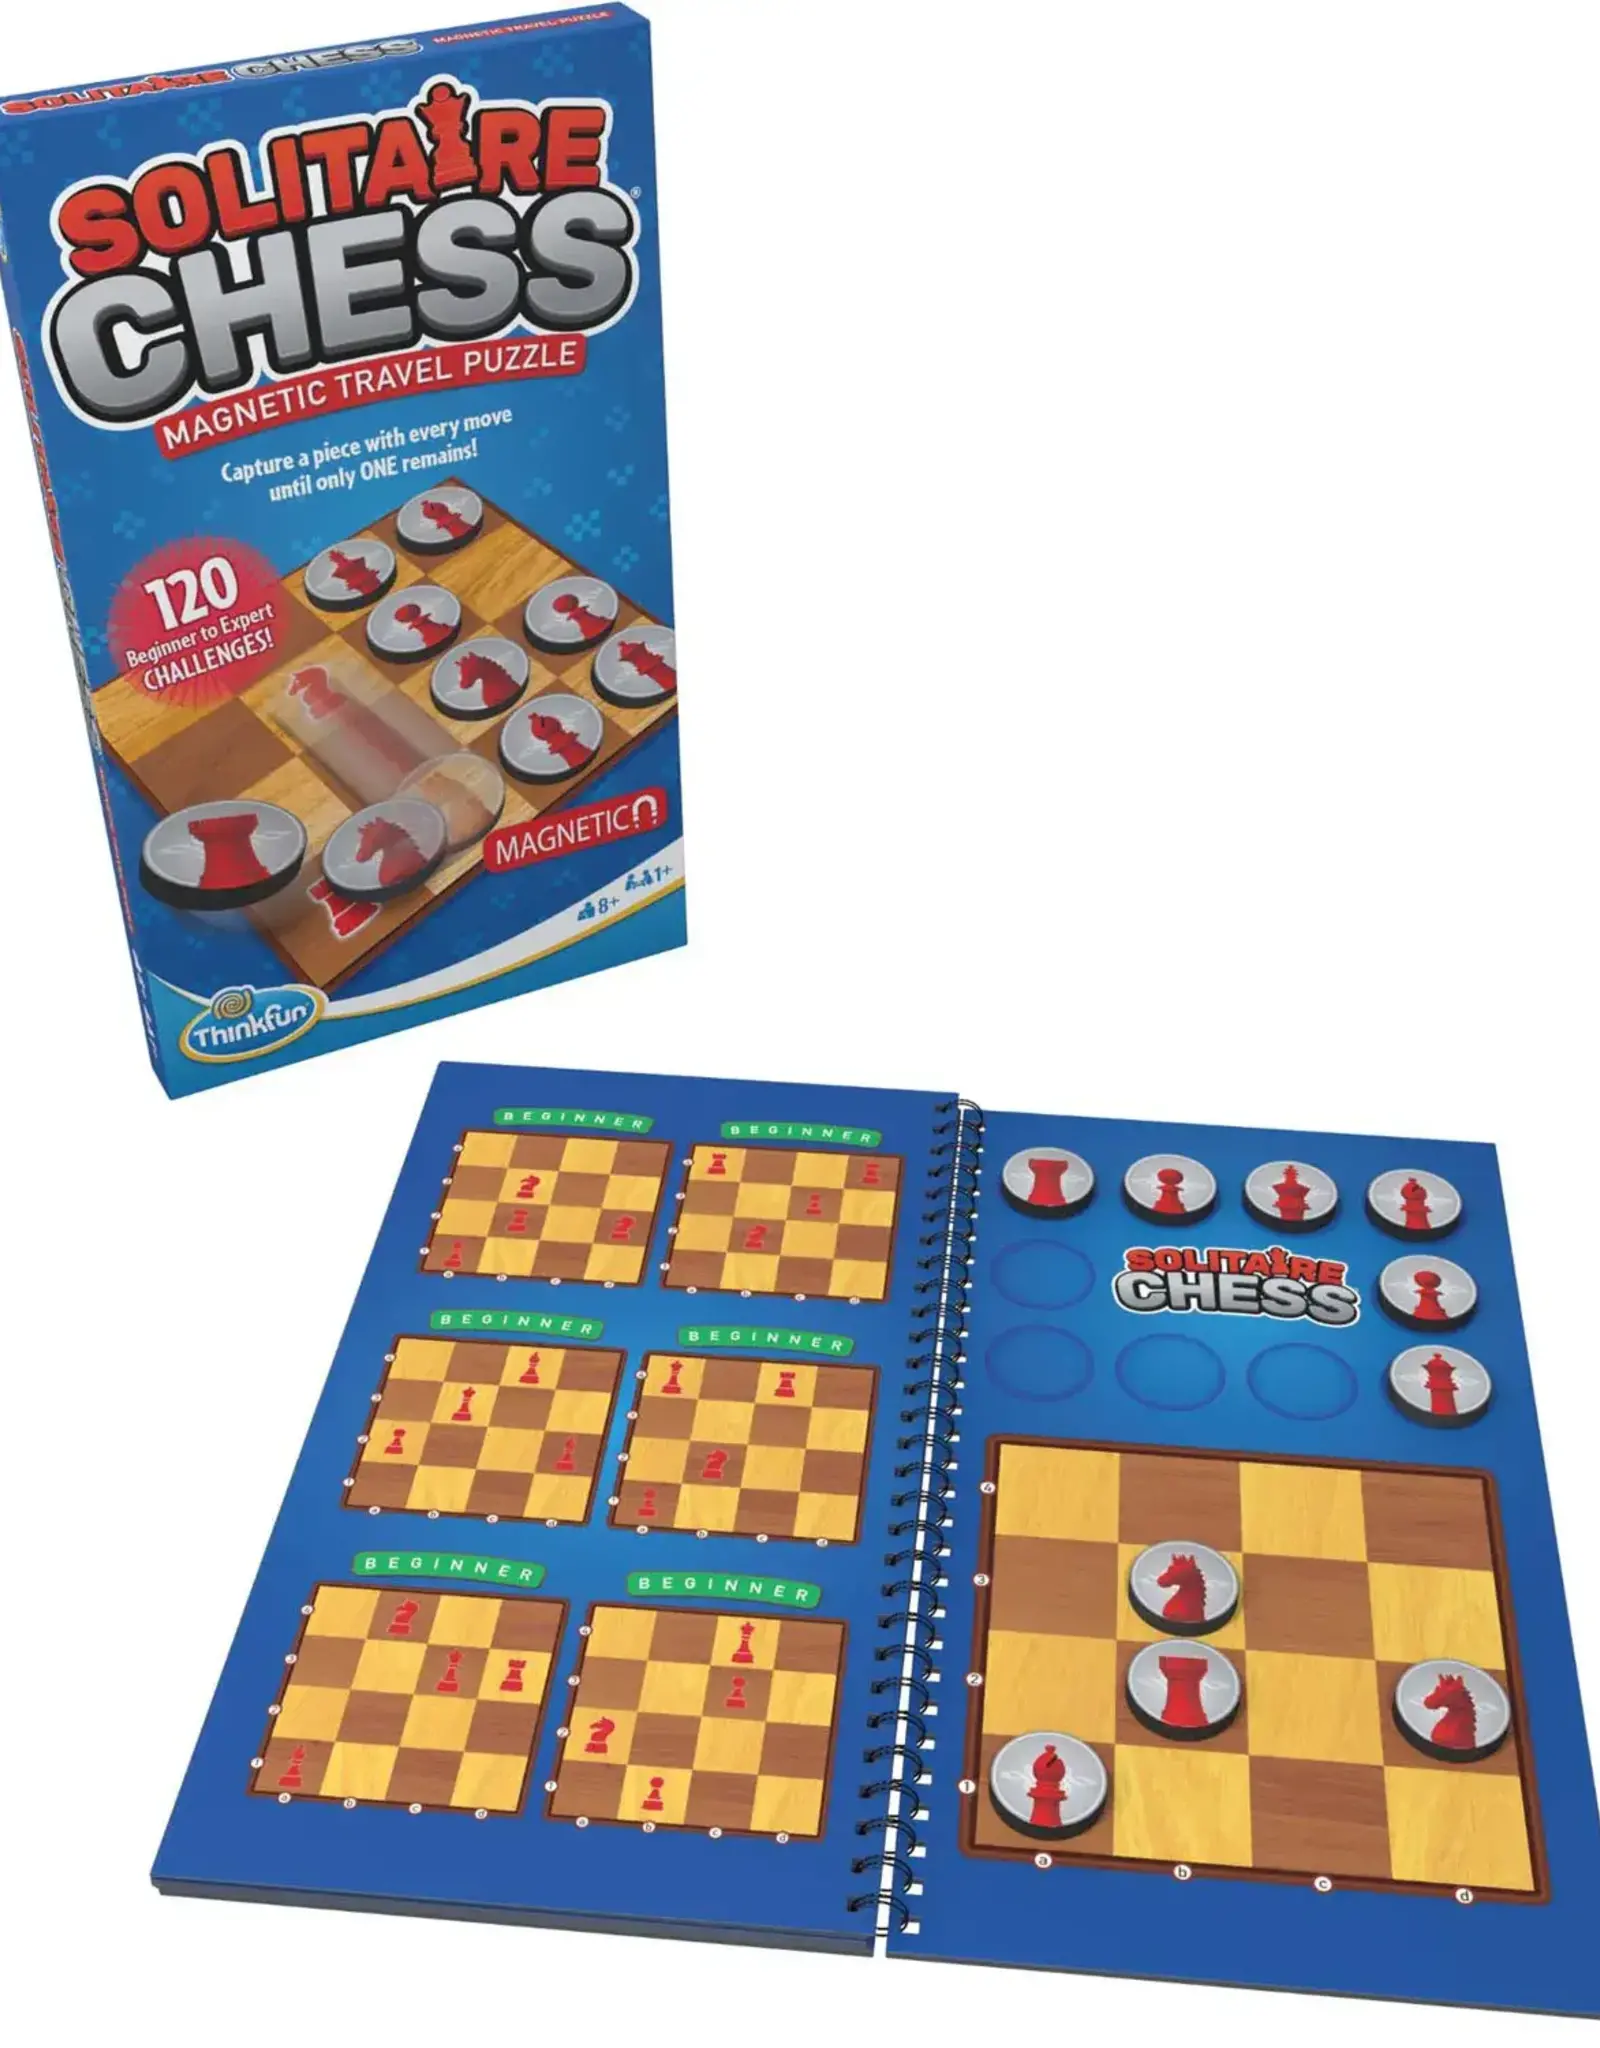 Ravensburger Solitaire Chess Magnetic  Travel Puzzle